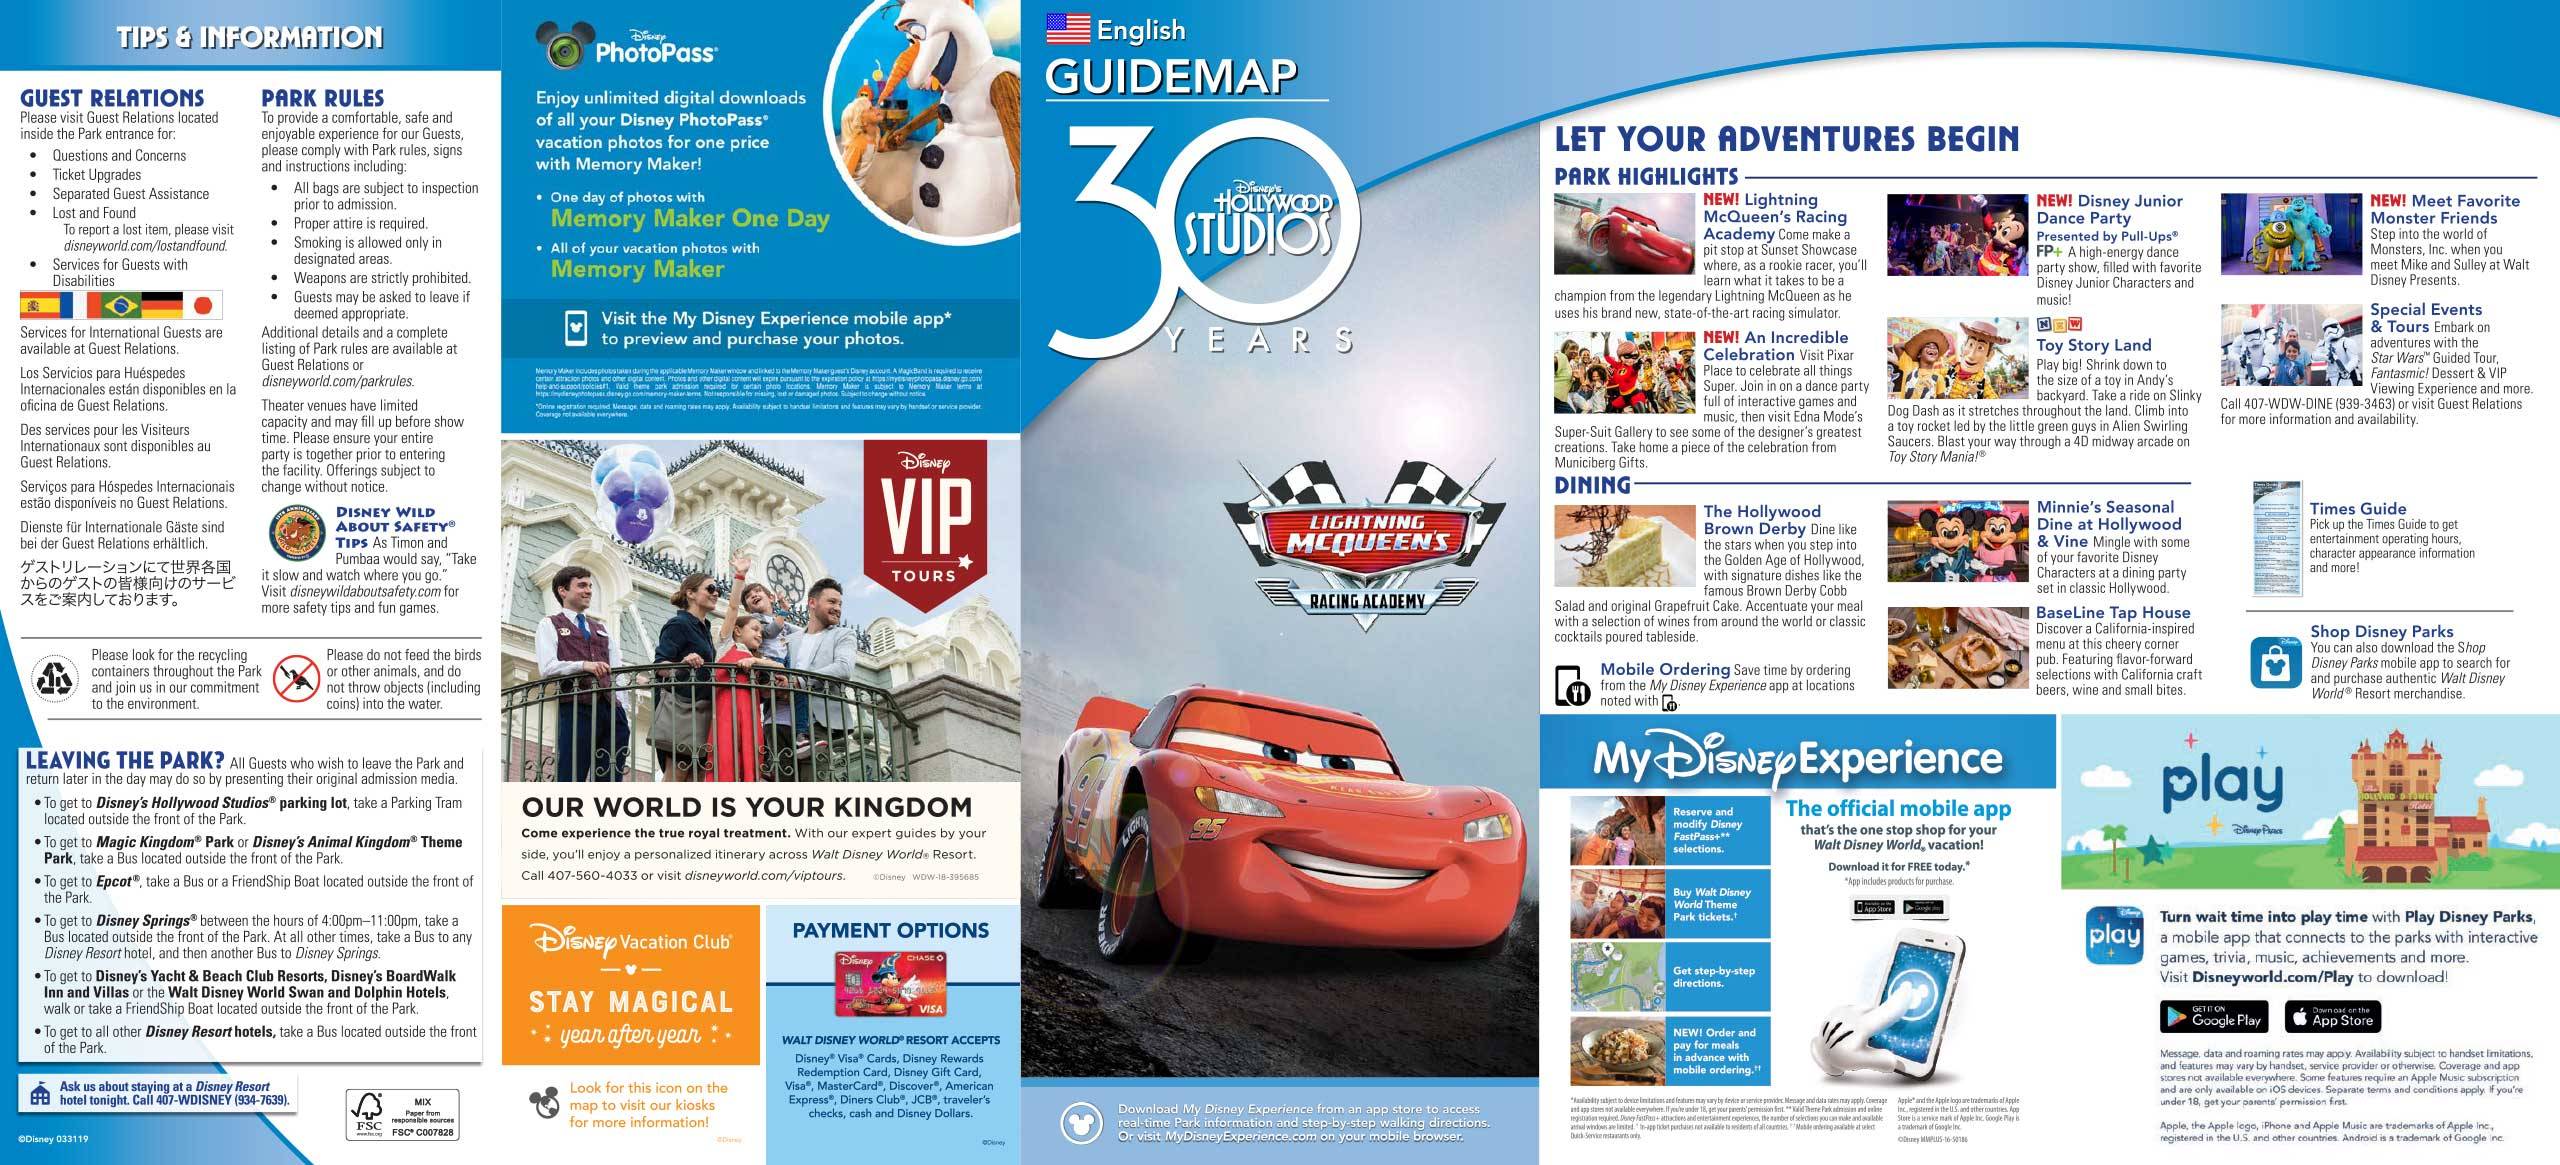 30th Anniversary Guide Map for Disney's Hollywood Studios